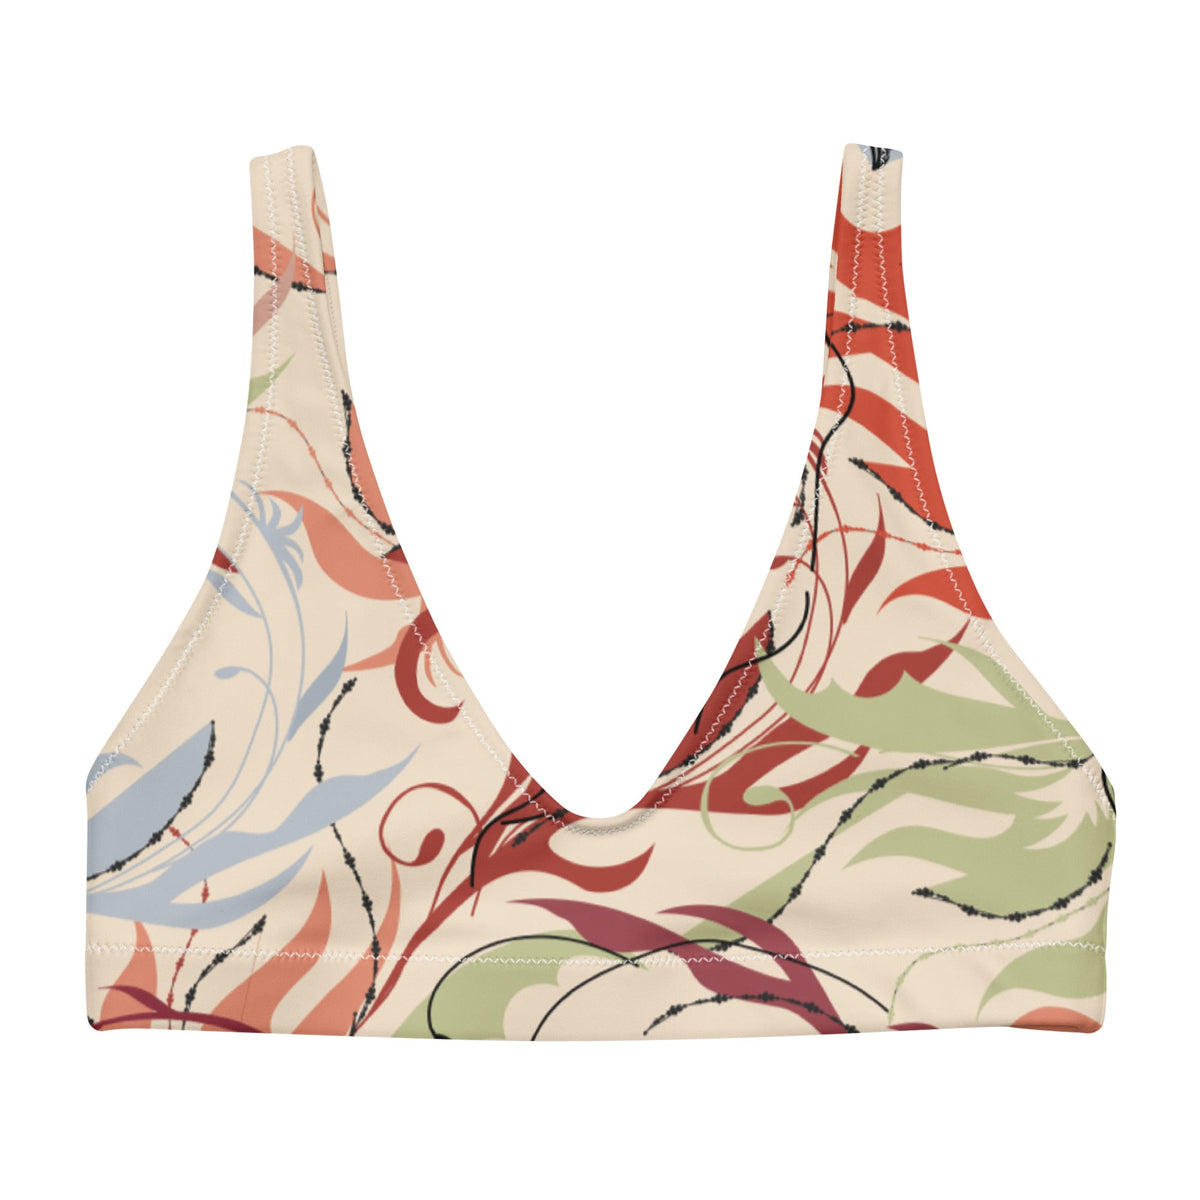 Floral Push Up Bowknot Bikini With Ruffles And Bandage Detail Two Pieces  For Women Perfect For Swimwear, Beachwear And Biquini Style 220527 From  Lu006, $15.81